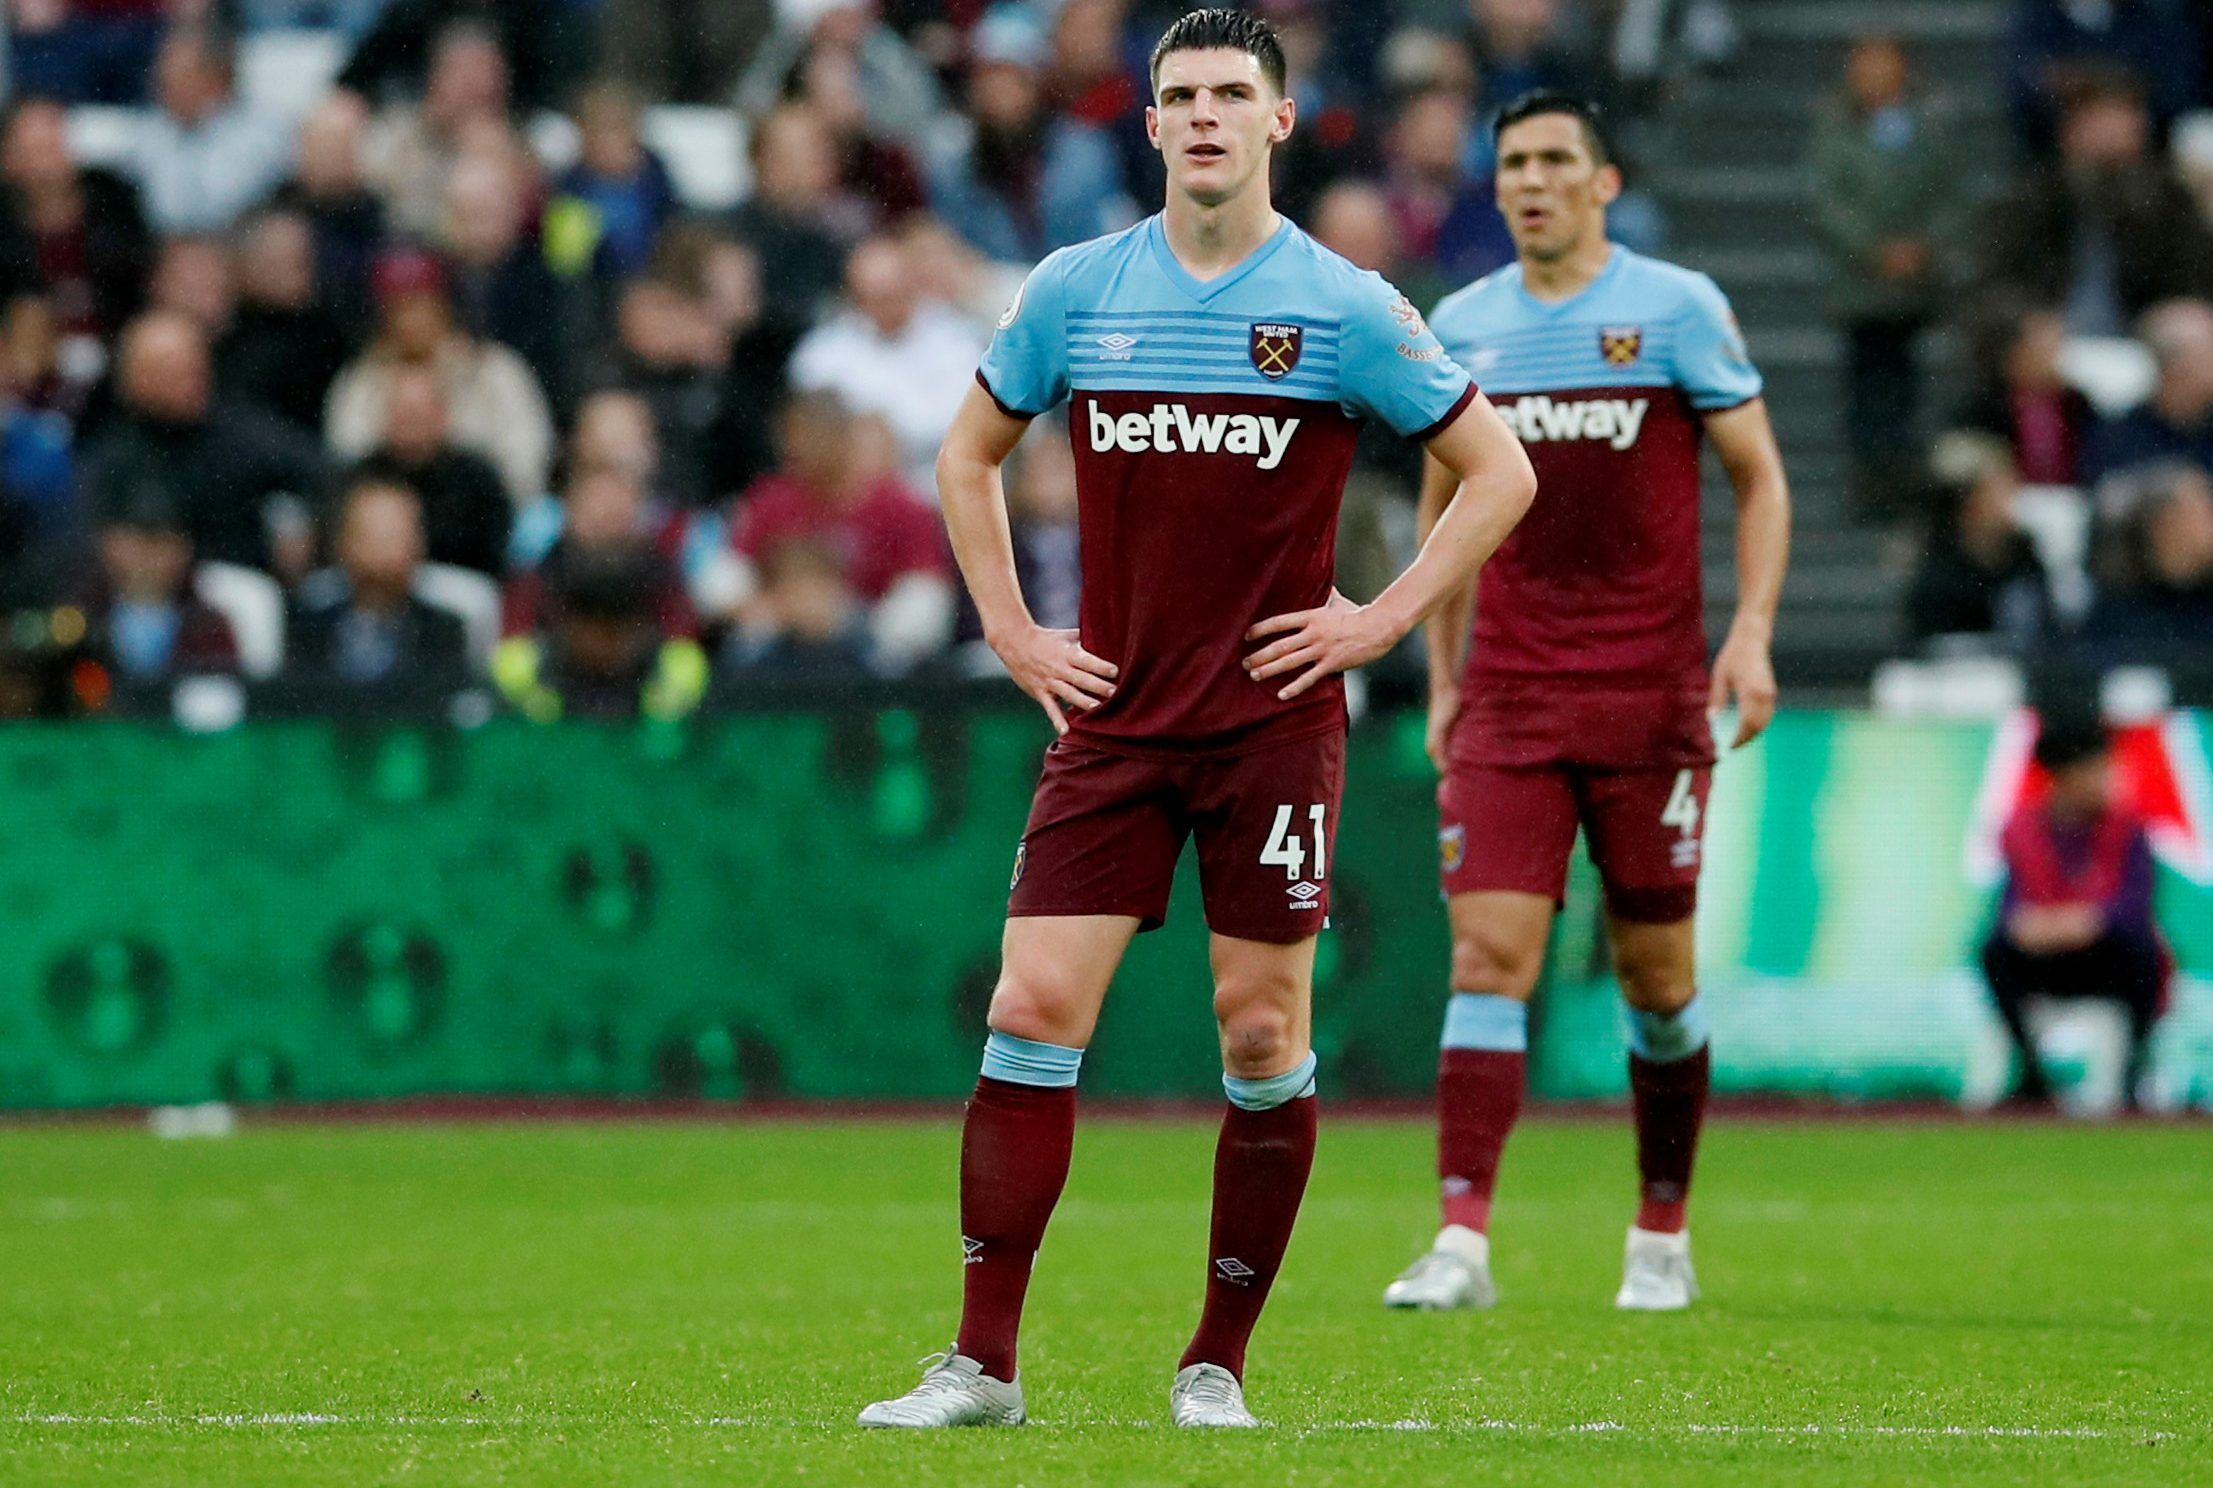 Soccer Football - Premier League - West Ham United v Sheffield United - London Stadium, London, Britain - October 26, 2019  West Ham United's Declan Rice reacts during the match    REUTERS/David Klein  EDITORIAL USE ONLY. No use with unauthorized audio, video, data, fixture lists, club/league logos or 